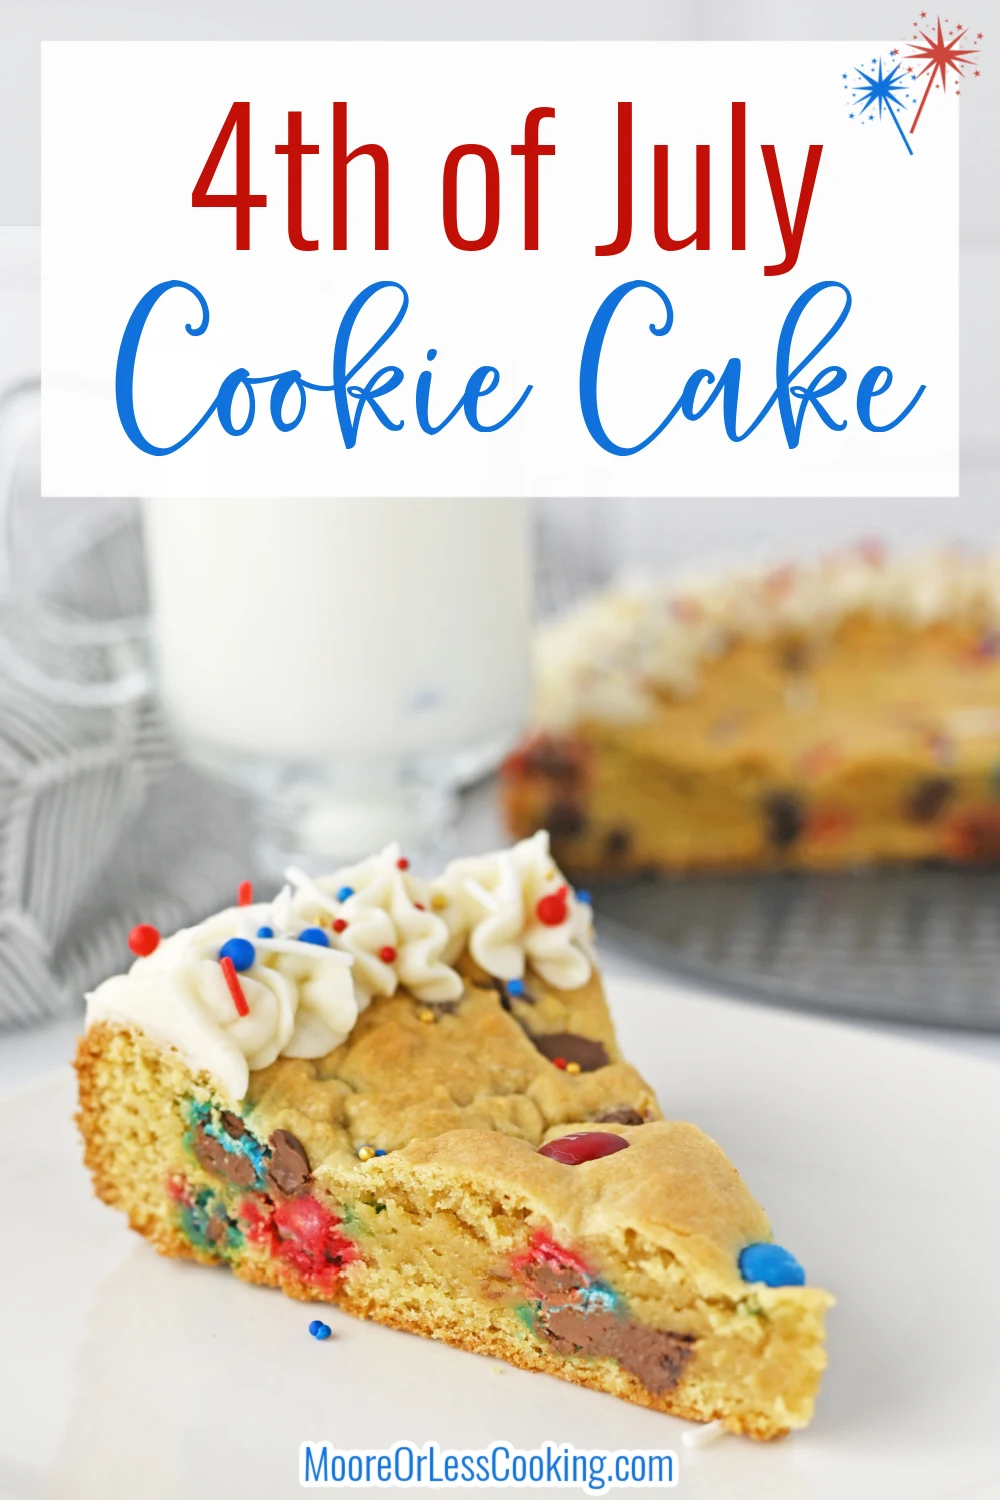 This sweet and gooey chocolate chip 4th Of July Cookie Cake is studded with colorful M&M candies for a bite of chocolate goodness in every slice. Pipe on dollops of whipped cream stars around the edges and garnish with red, white and blue sprinkles for a festive finish to this patriotic dessert. via @Mooreorlesscook